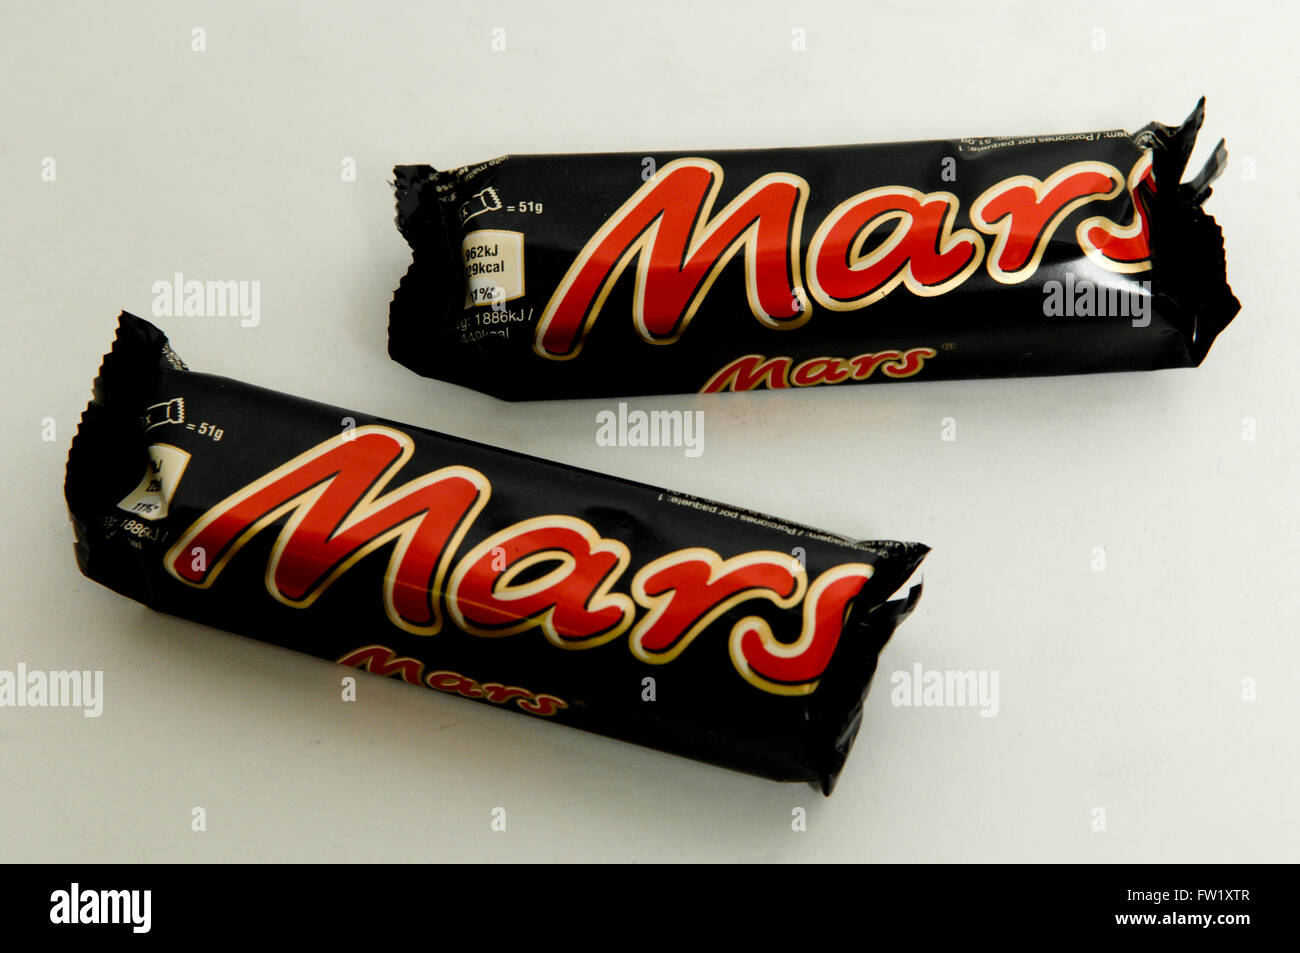 Mars is a British chocolate bar. It was first manufactured in 1932 in Slough, Berkshire in the United Kingdom Stock Photo